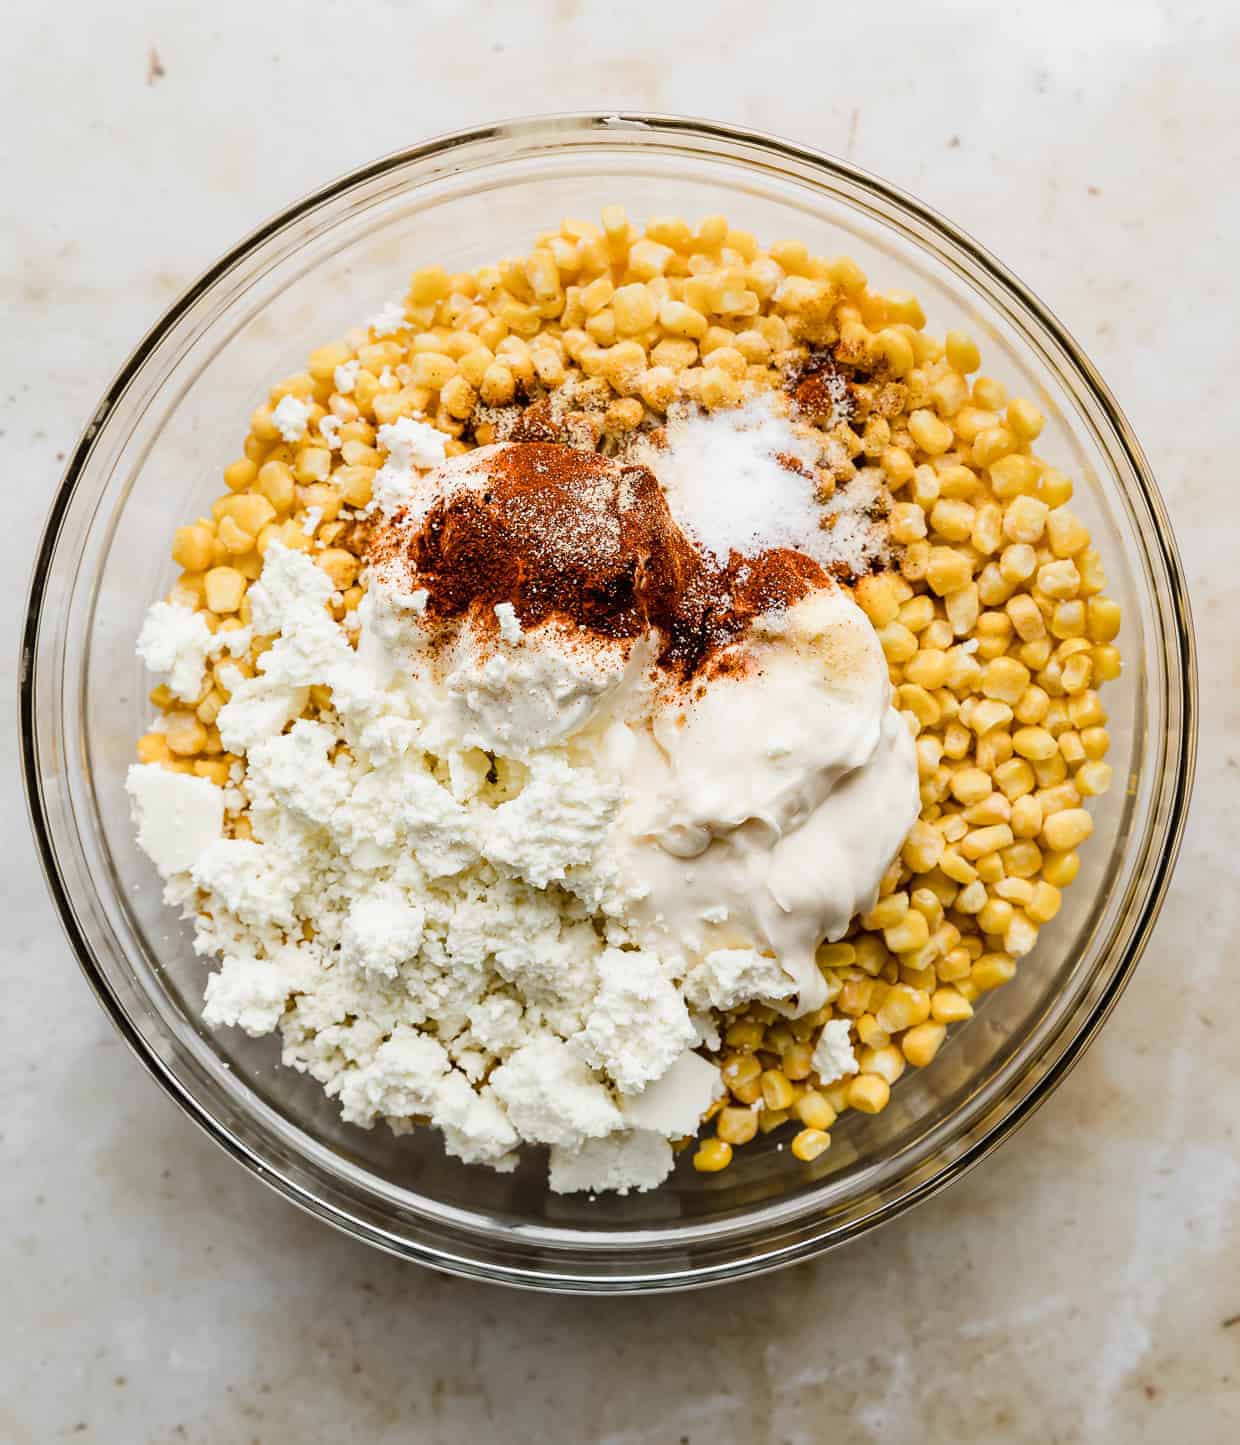 Corn kernels topped with chili powder, mayo, sour cream, and Mexican cheese in a glass bowl